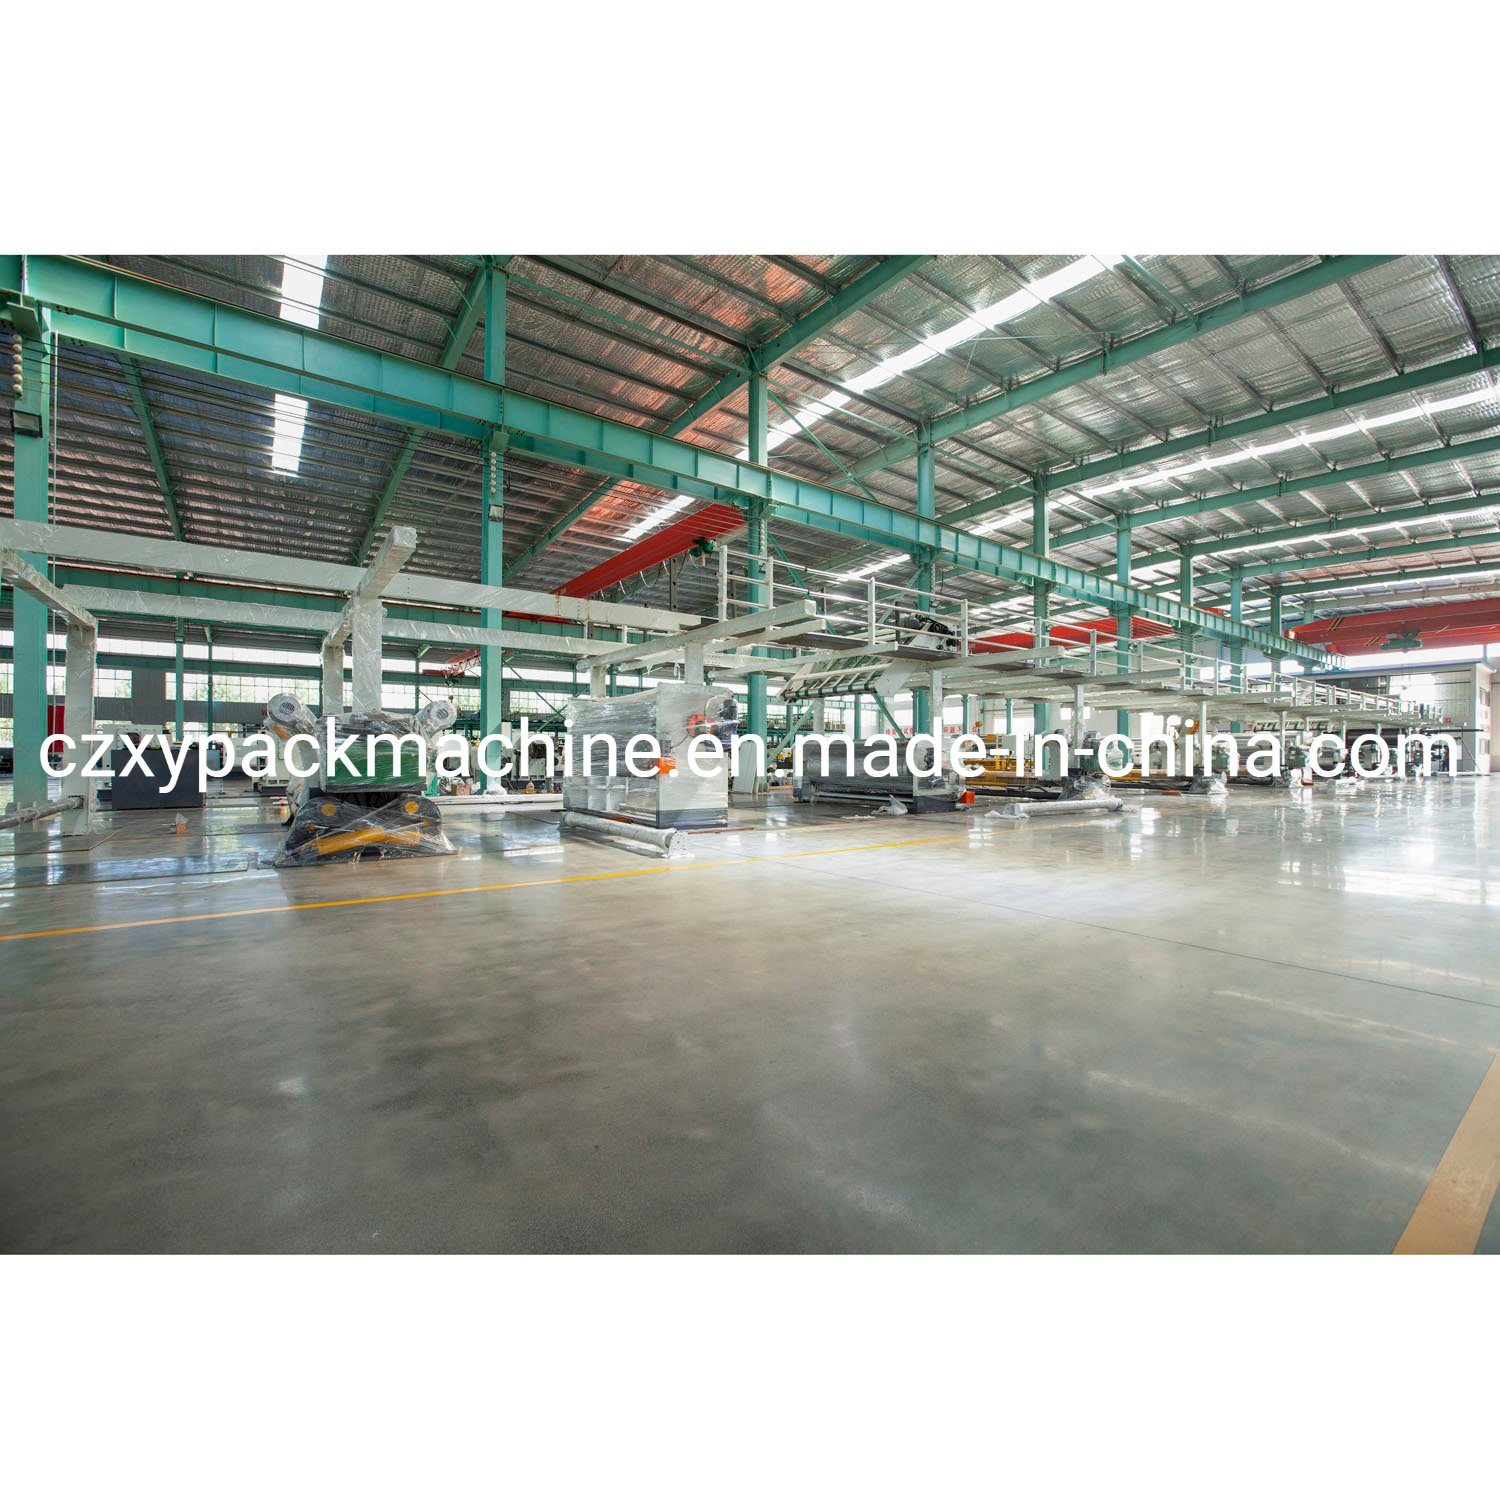 Wj 150-2200-5 Type Five Layer Corrugated Roller Cardboard Production Line